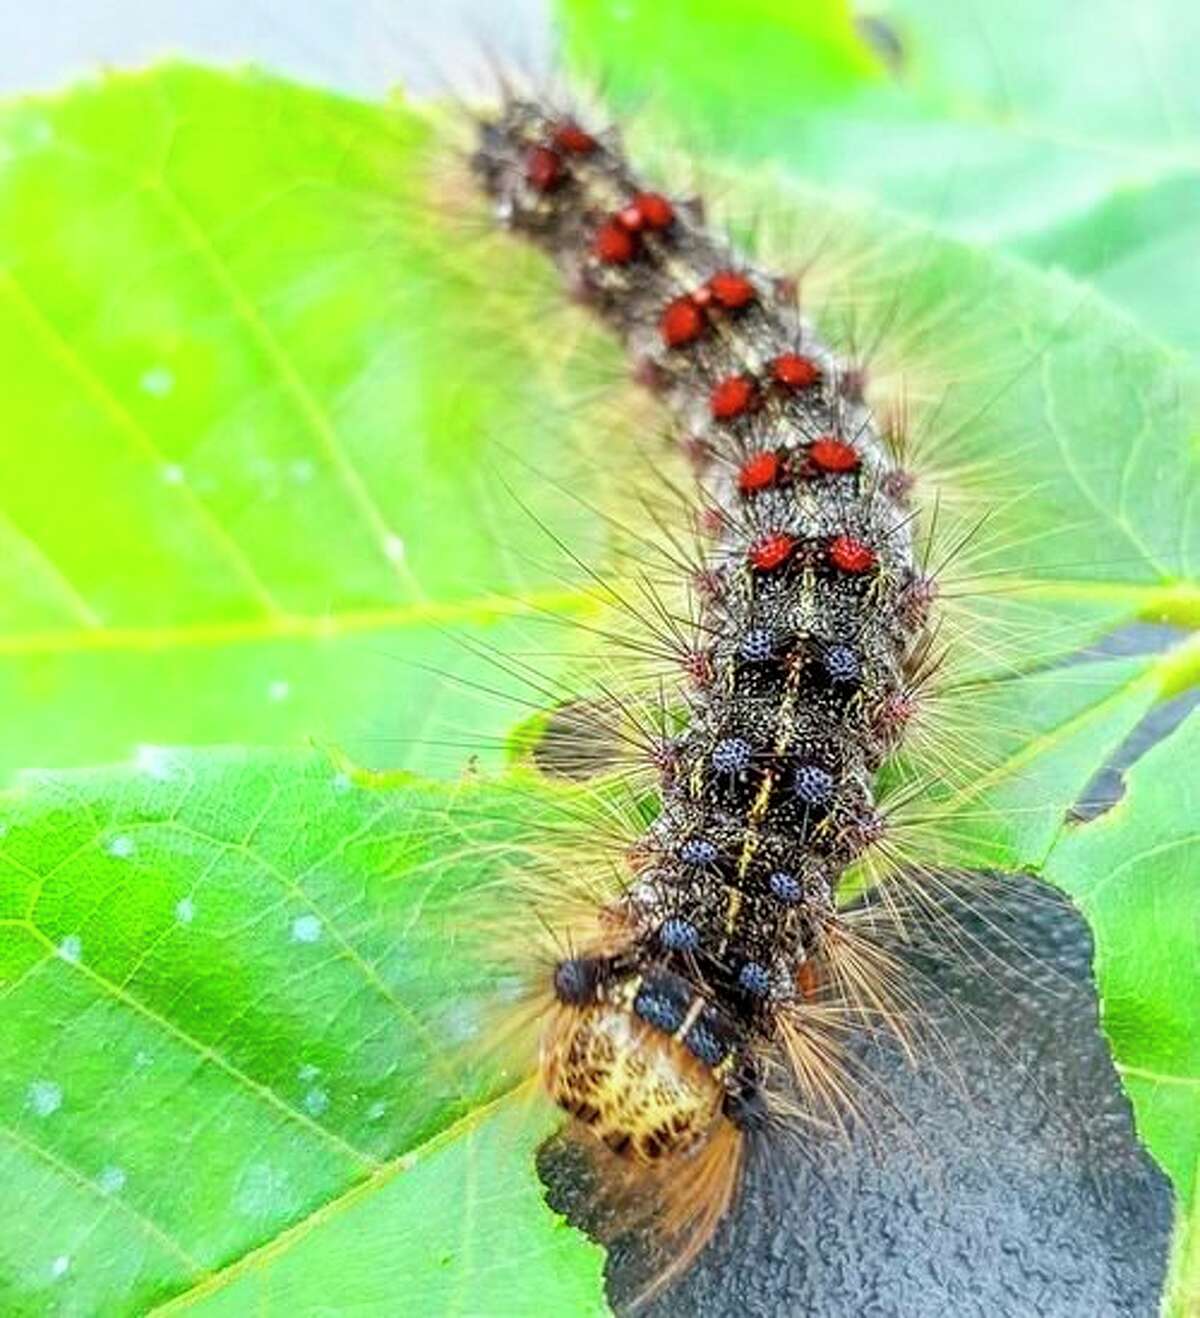 Gypsy moth caterpillars feed on the leaves of oaks, aspen, crabapple and 300 other species trees from late May to early or mid-July. (Courtesy photo/Karla Salp/Washington State Department of Agriculture/Bugwood.org)